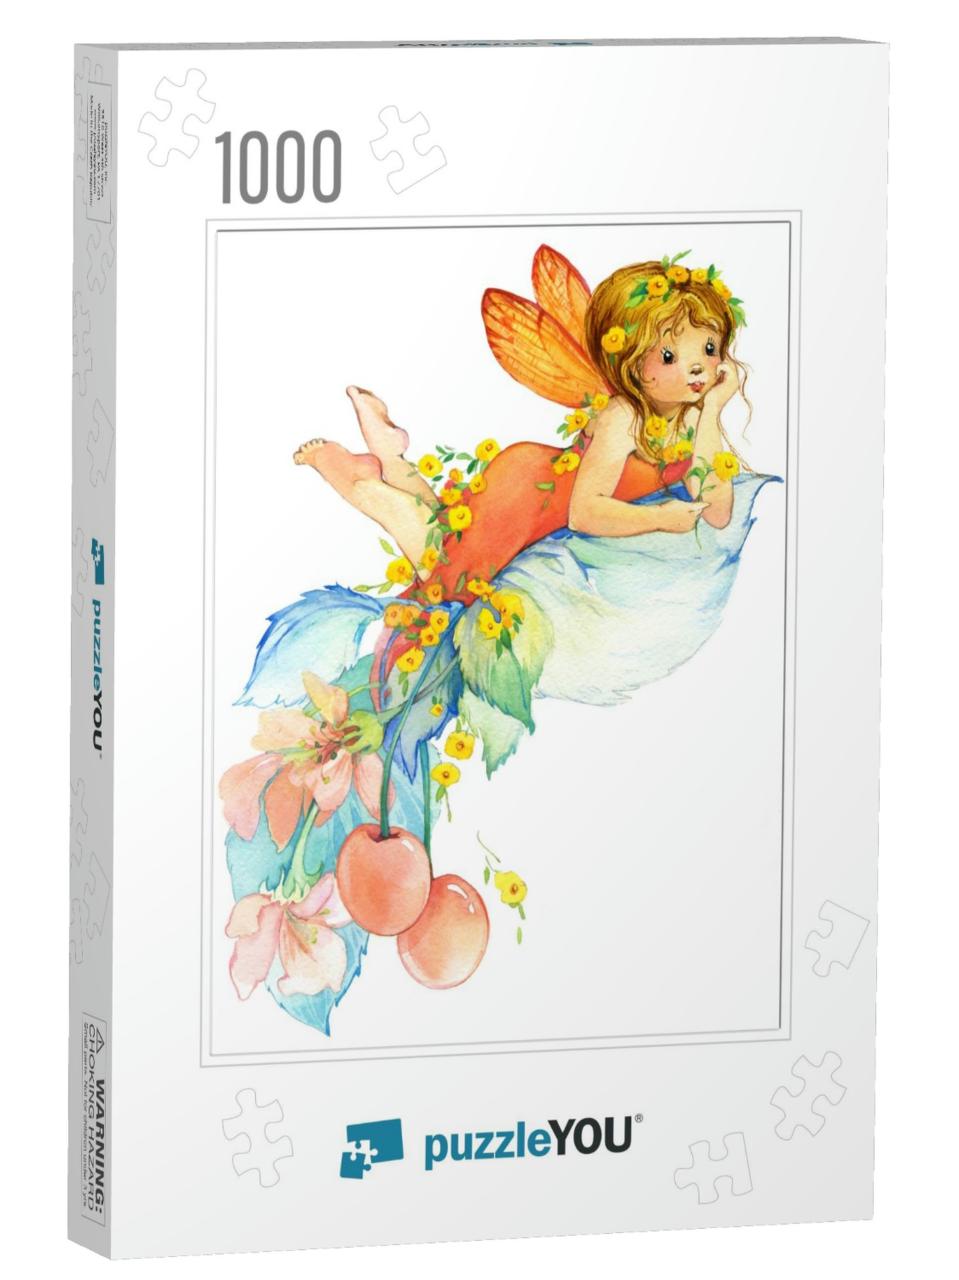 Cute Fairy Girl Watercolor Illustration. Greeting... Jigsaw Puzzle with 1000 pieces